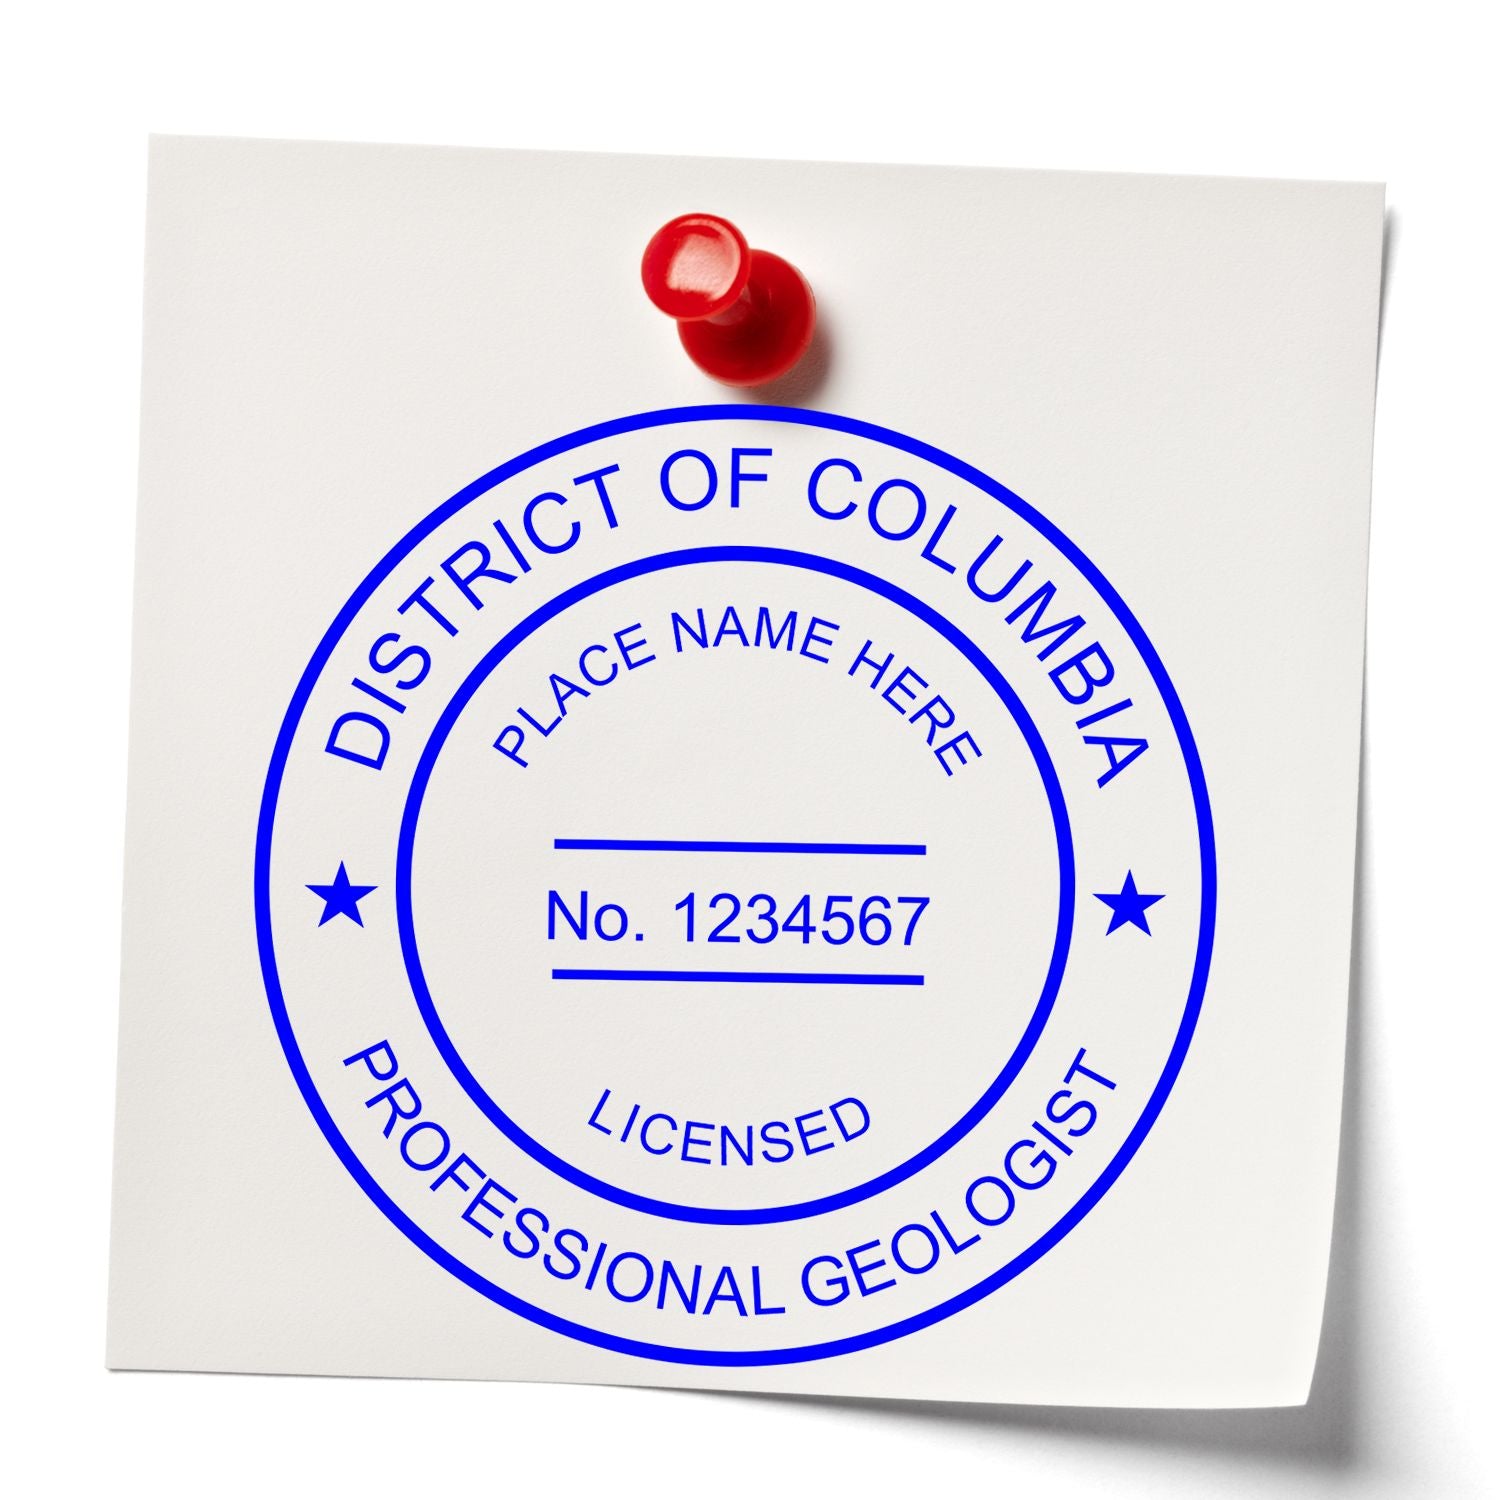 A lifestyle photo showing a stamped image of the Digital District of Columbia Geologist Stamp, Electronic Seal for District of Columbia Geologist on a piece of paper